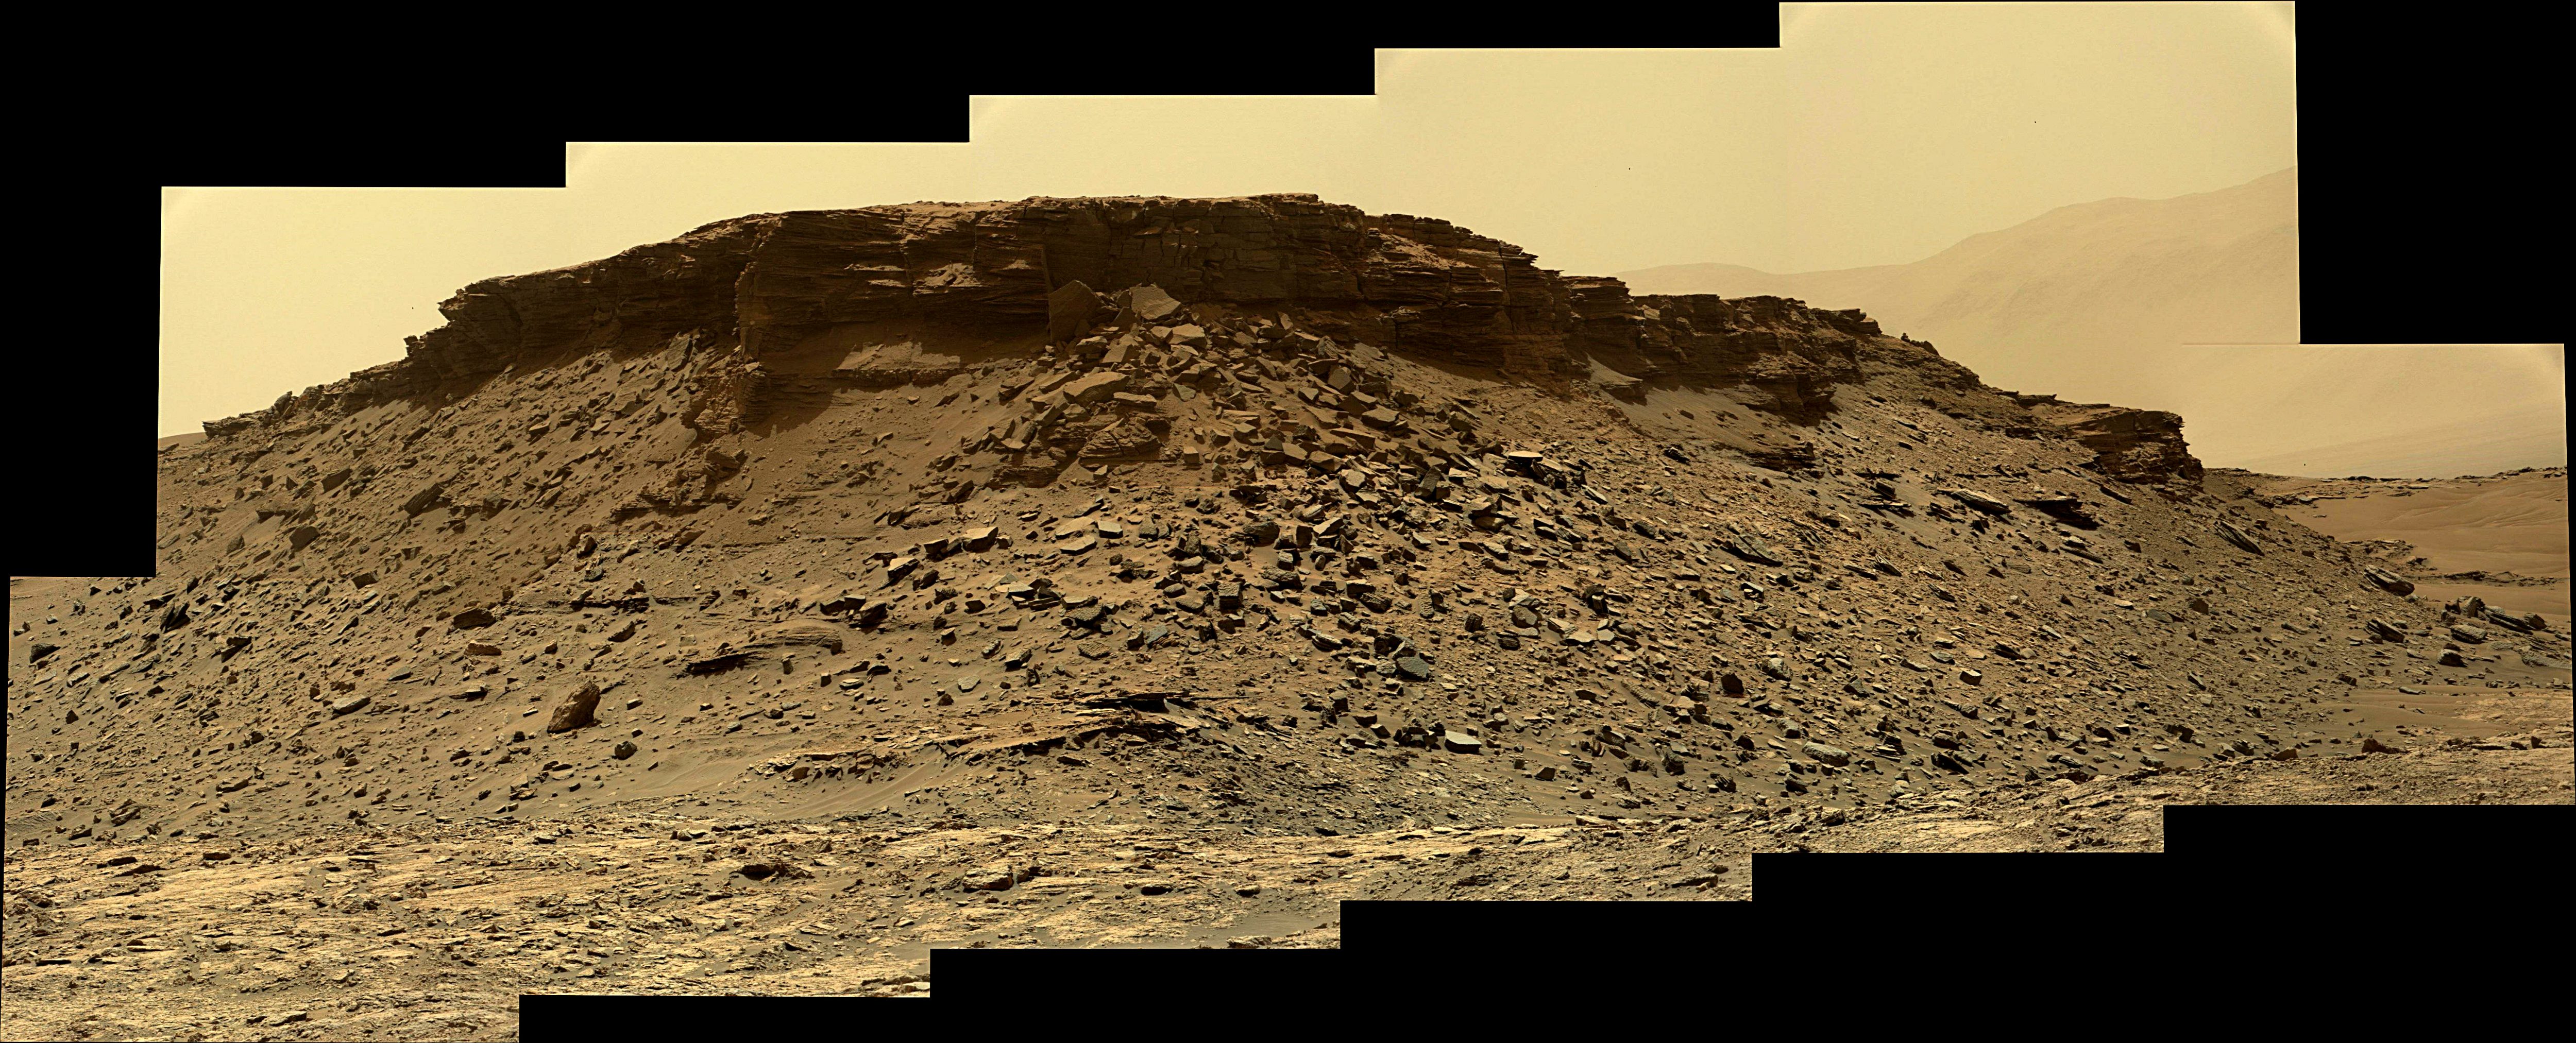 panoramic curiosity rover view 1e - sol 1434 - was life on mars